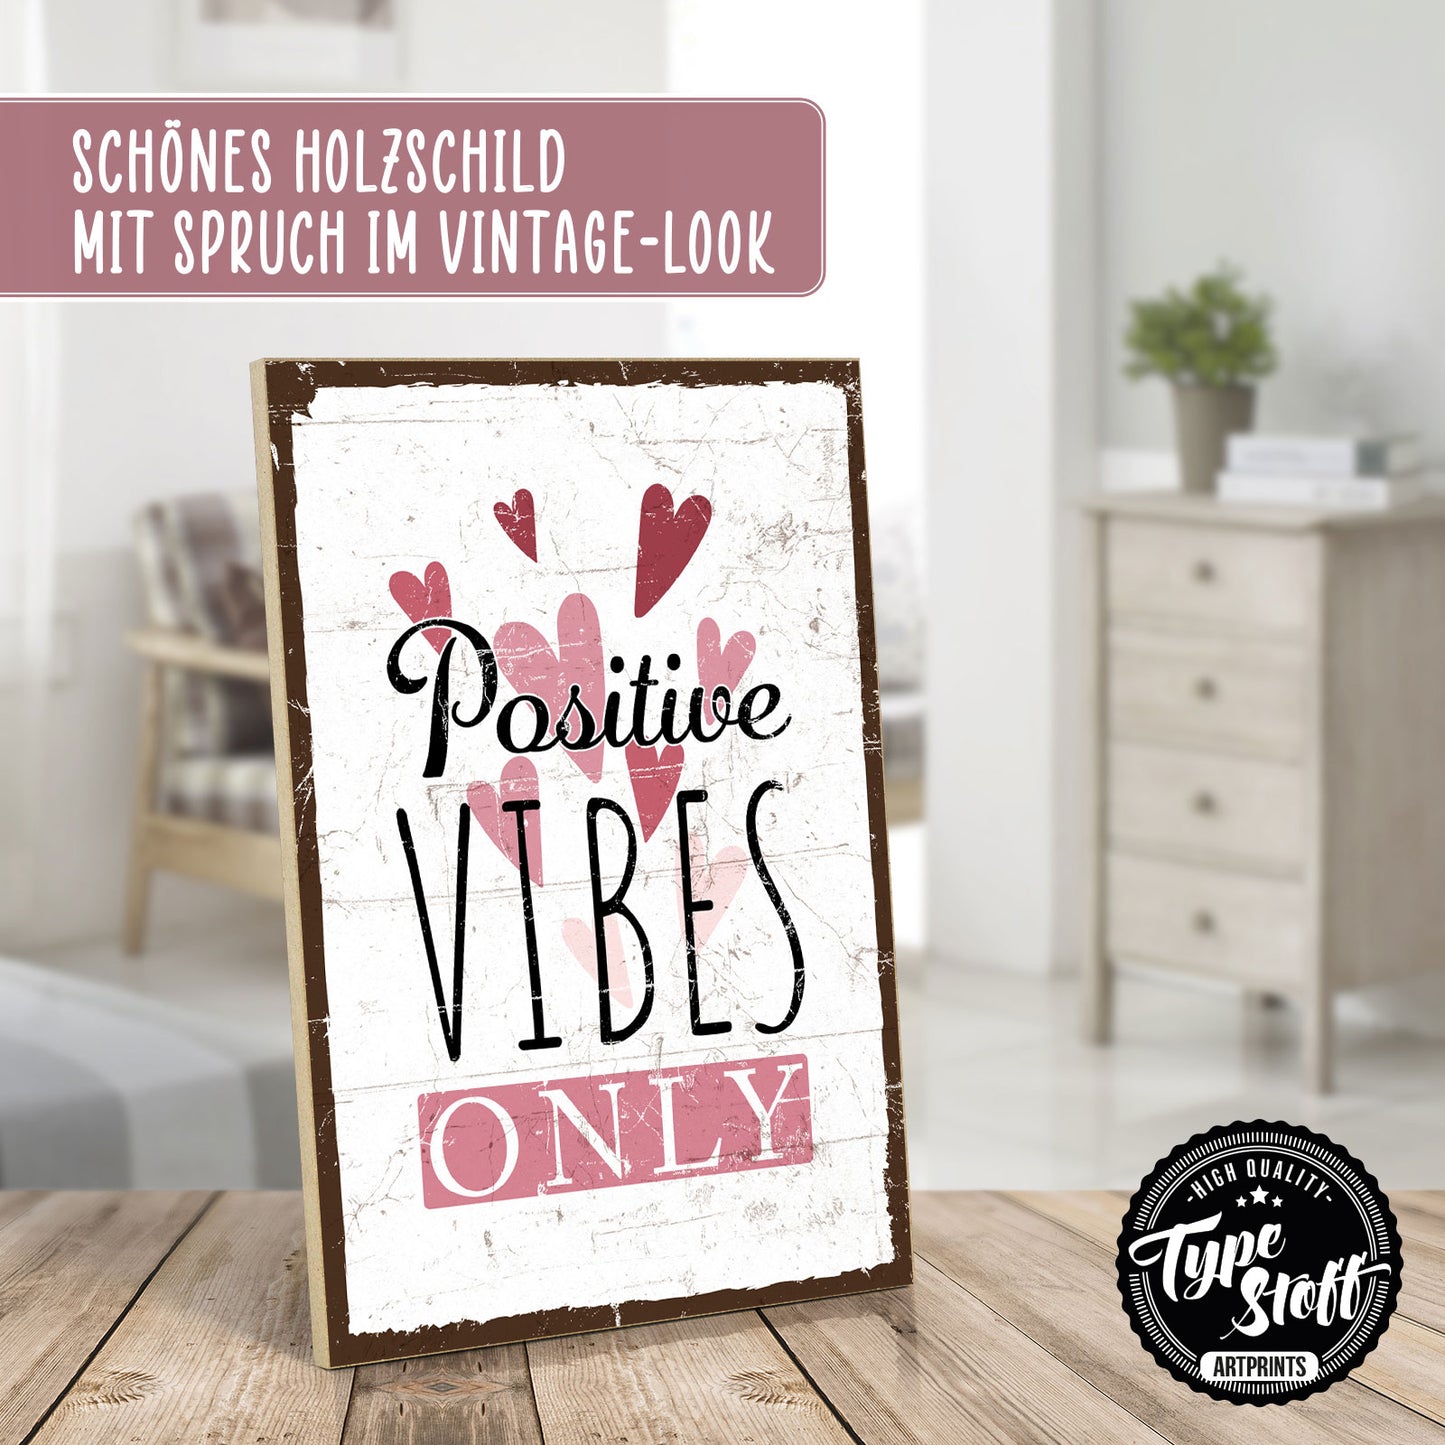 Holzschild mit Spruch - Positive vibes only – HS-GH-00862